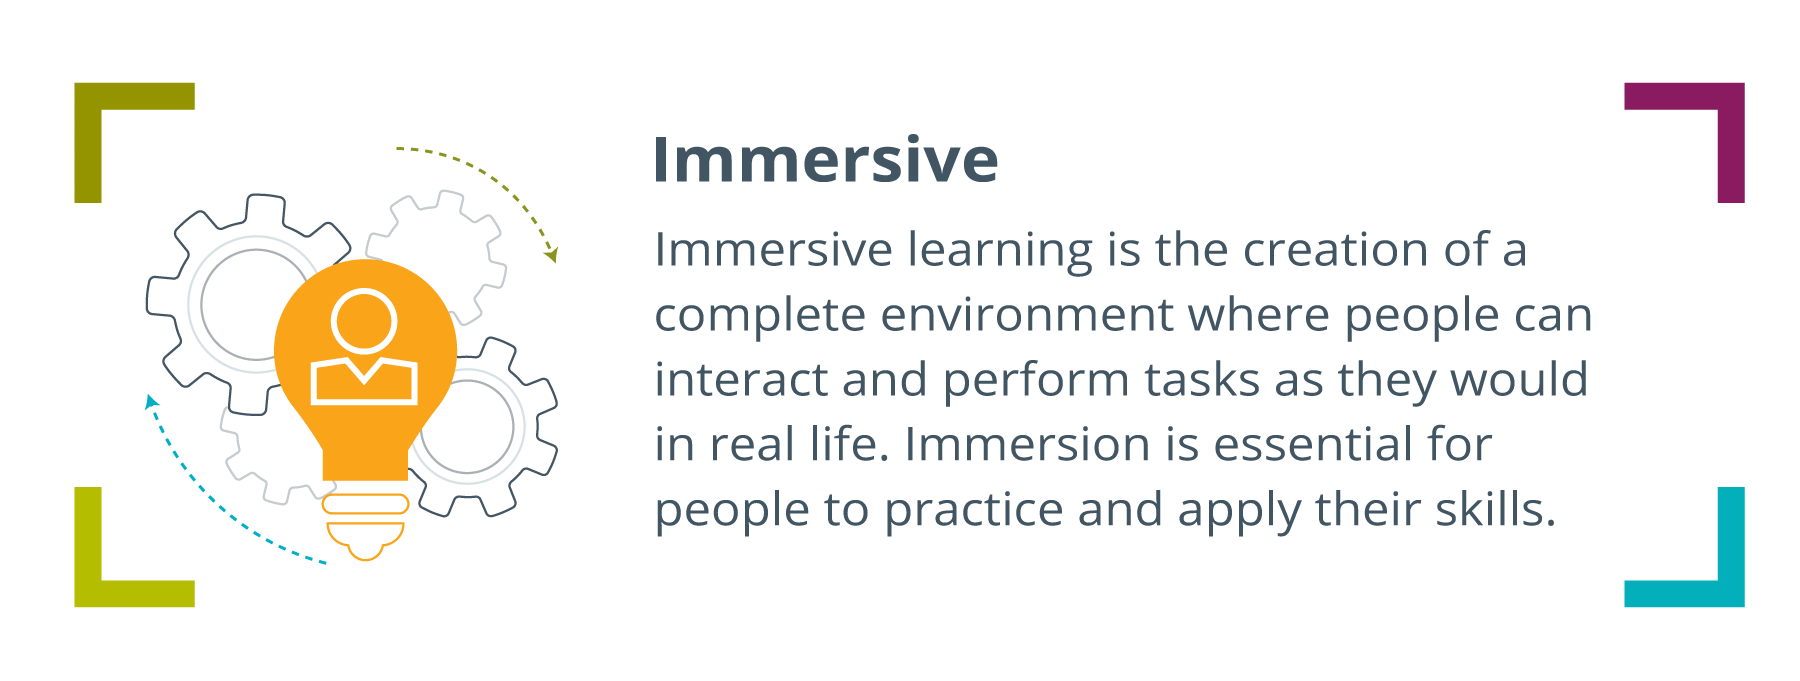 lightbulb surrounded by gears moving, to the right written: Immersive: Immersive learning is the creation of a complete environment where people can interact and perform tasks as they would in real life. Immersion is essential for people to practice and apply their skills.